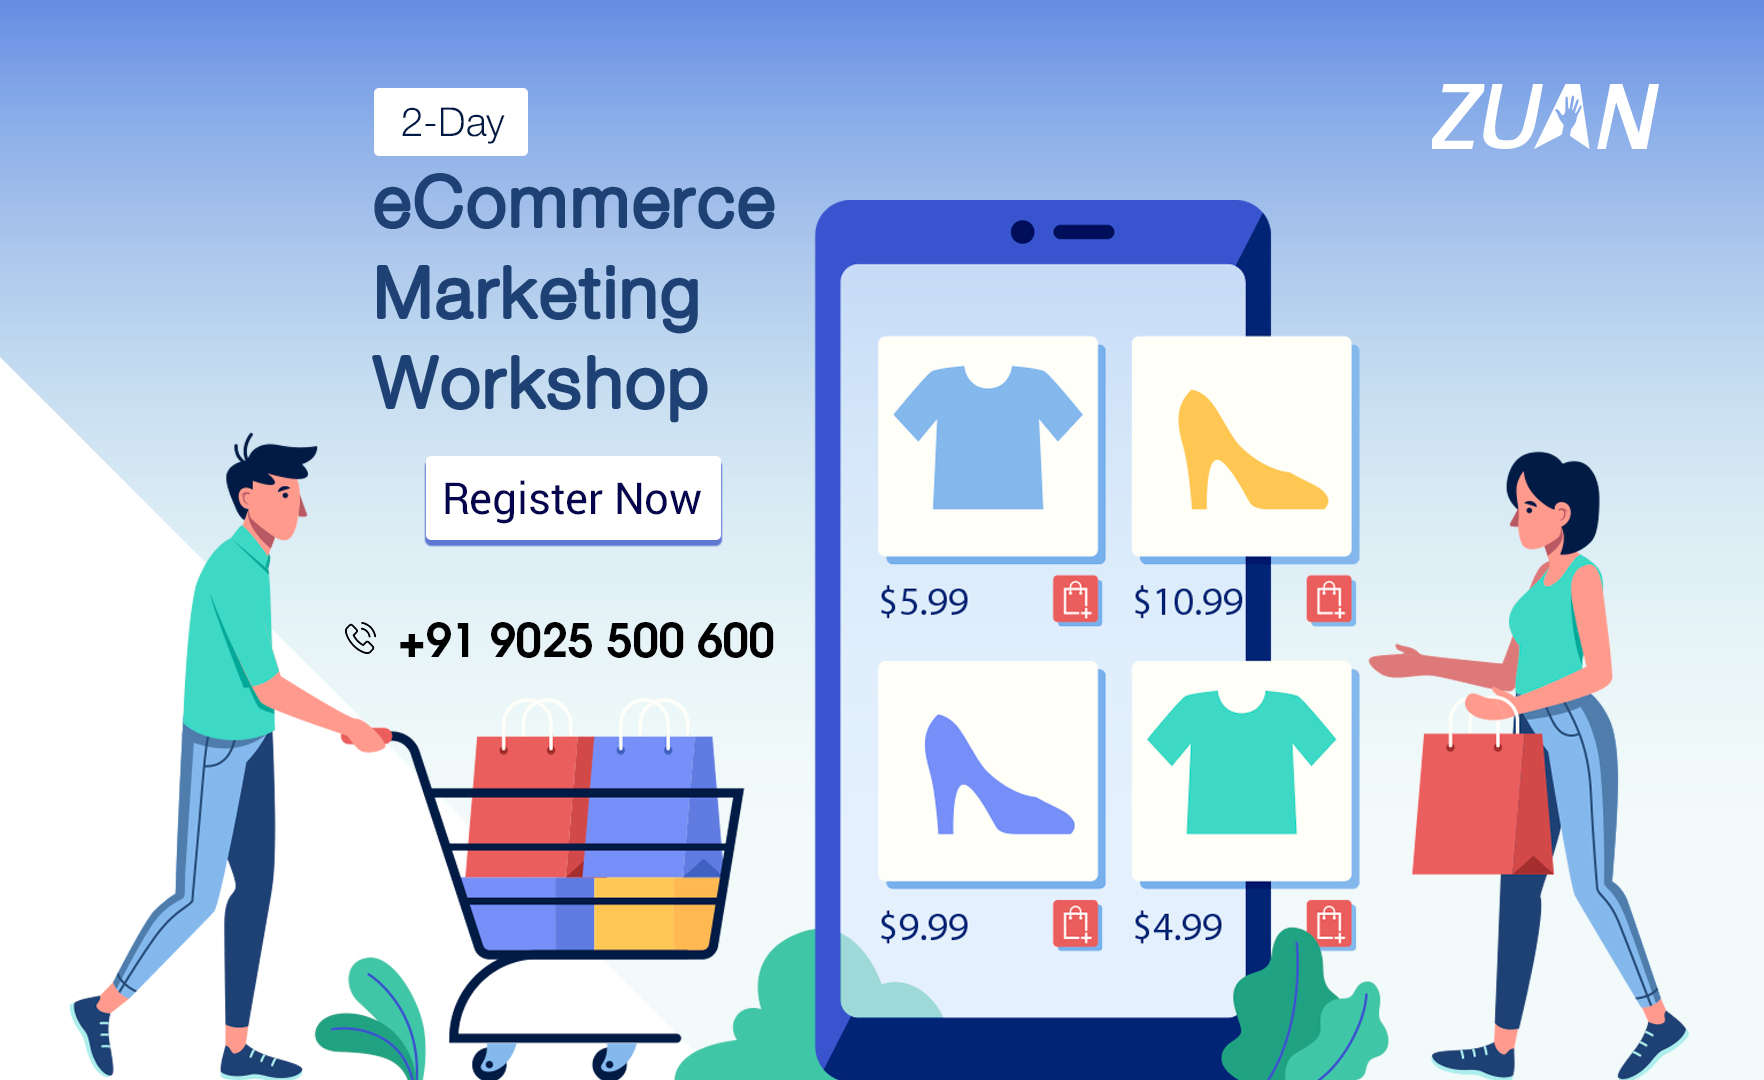 Workshop - Build and Market eCommerce Websites for Small Businesses, Chennai, Tamil Nadu, India